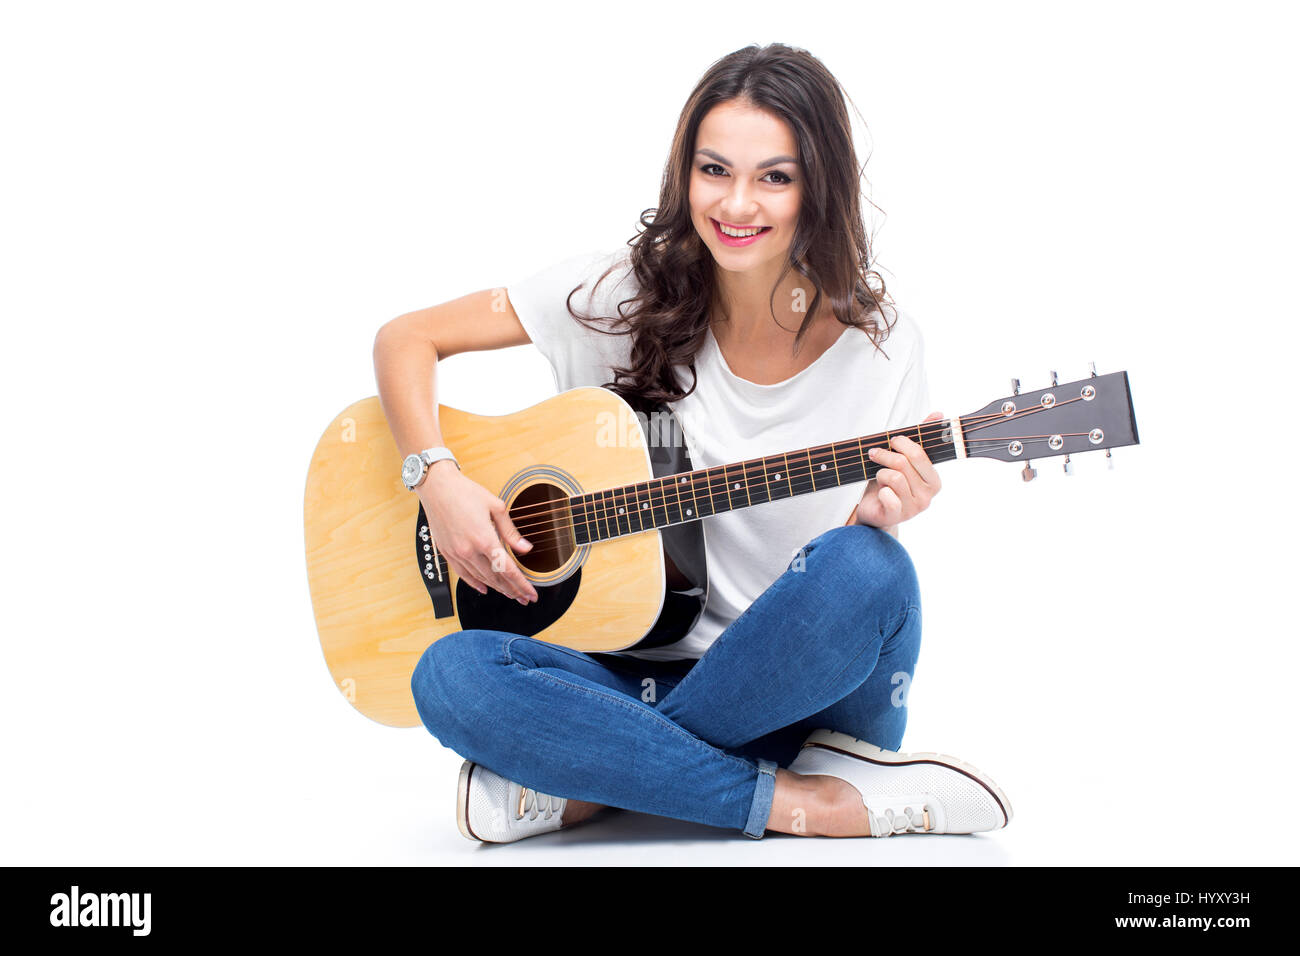 Smiling young woman sitting and playing guitar isolated on white Stock Photo